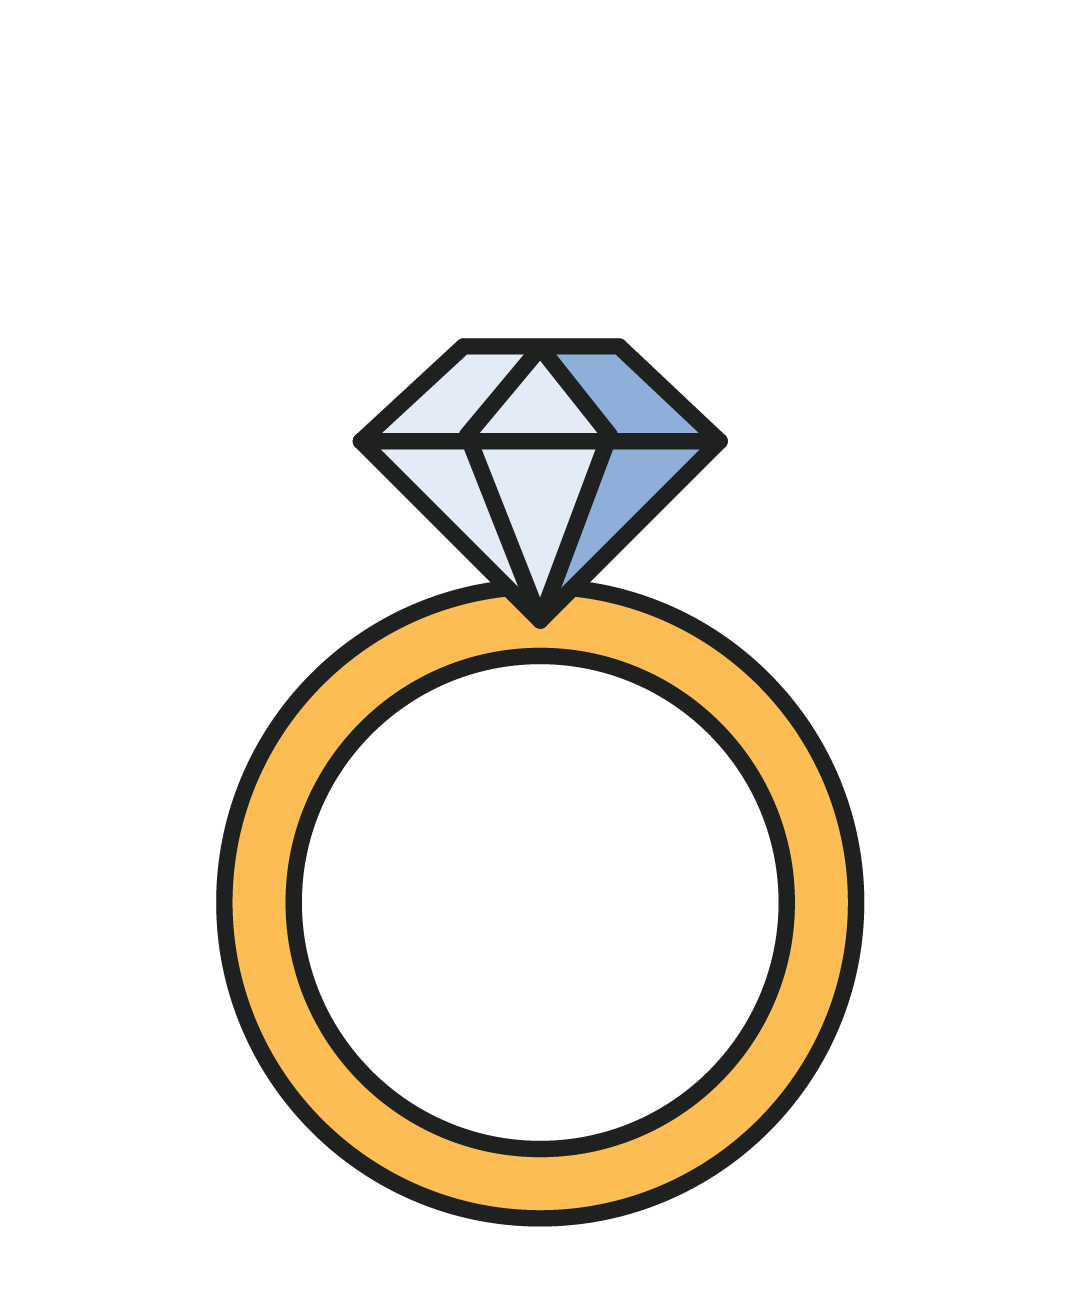 Ring (animated GIF inside) by Gilles Munten on Dribbble